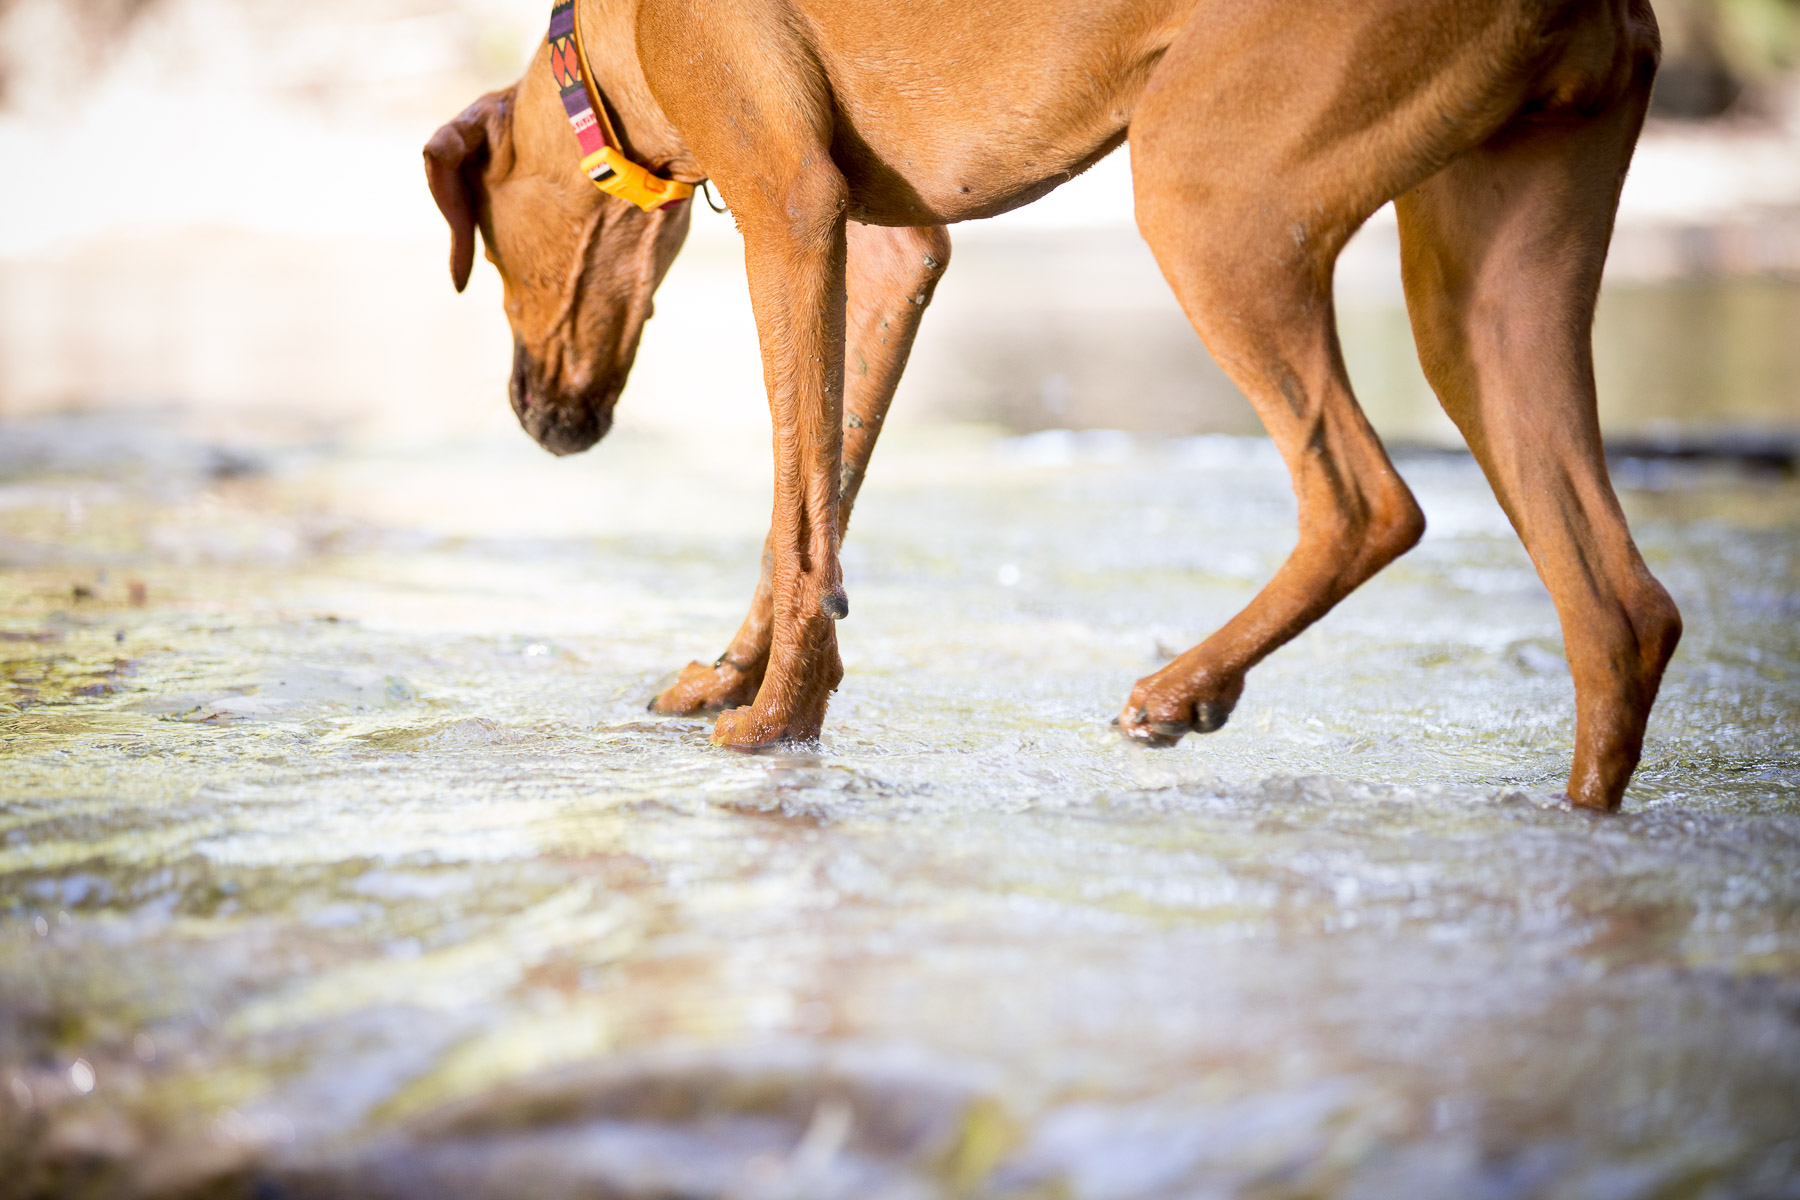 dog-legs-paws-in-the-water-hicking-river.jpg